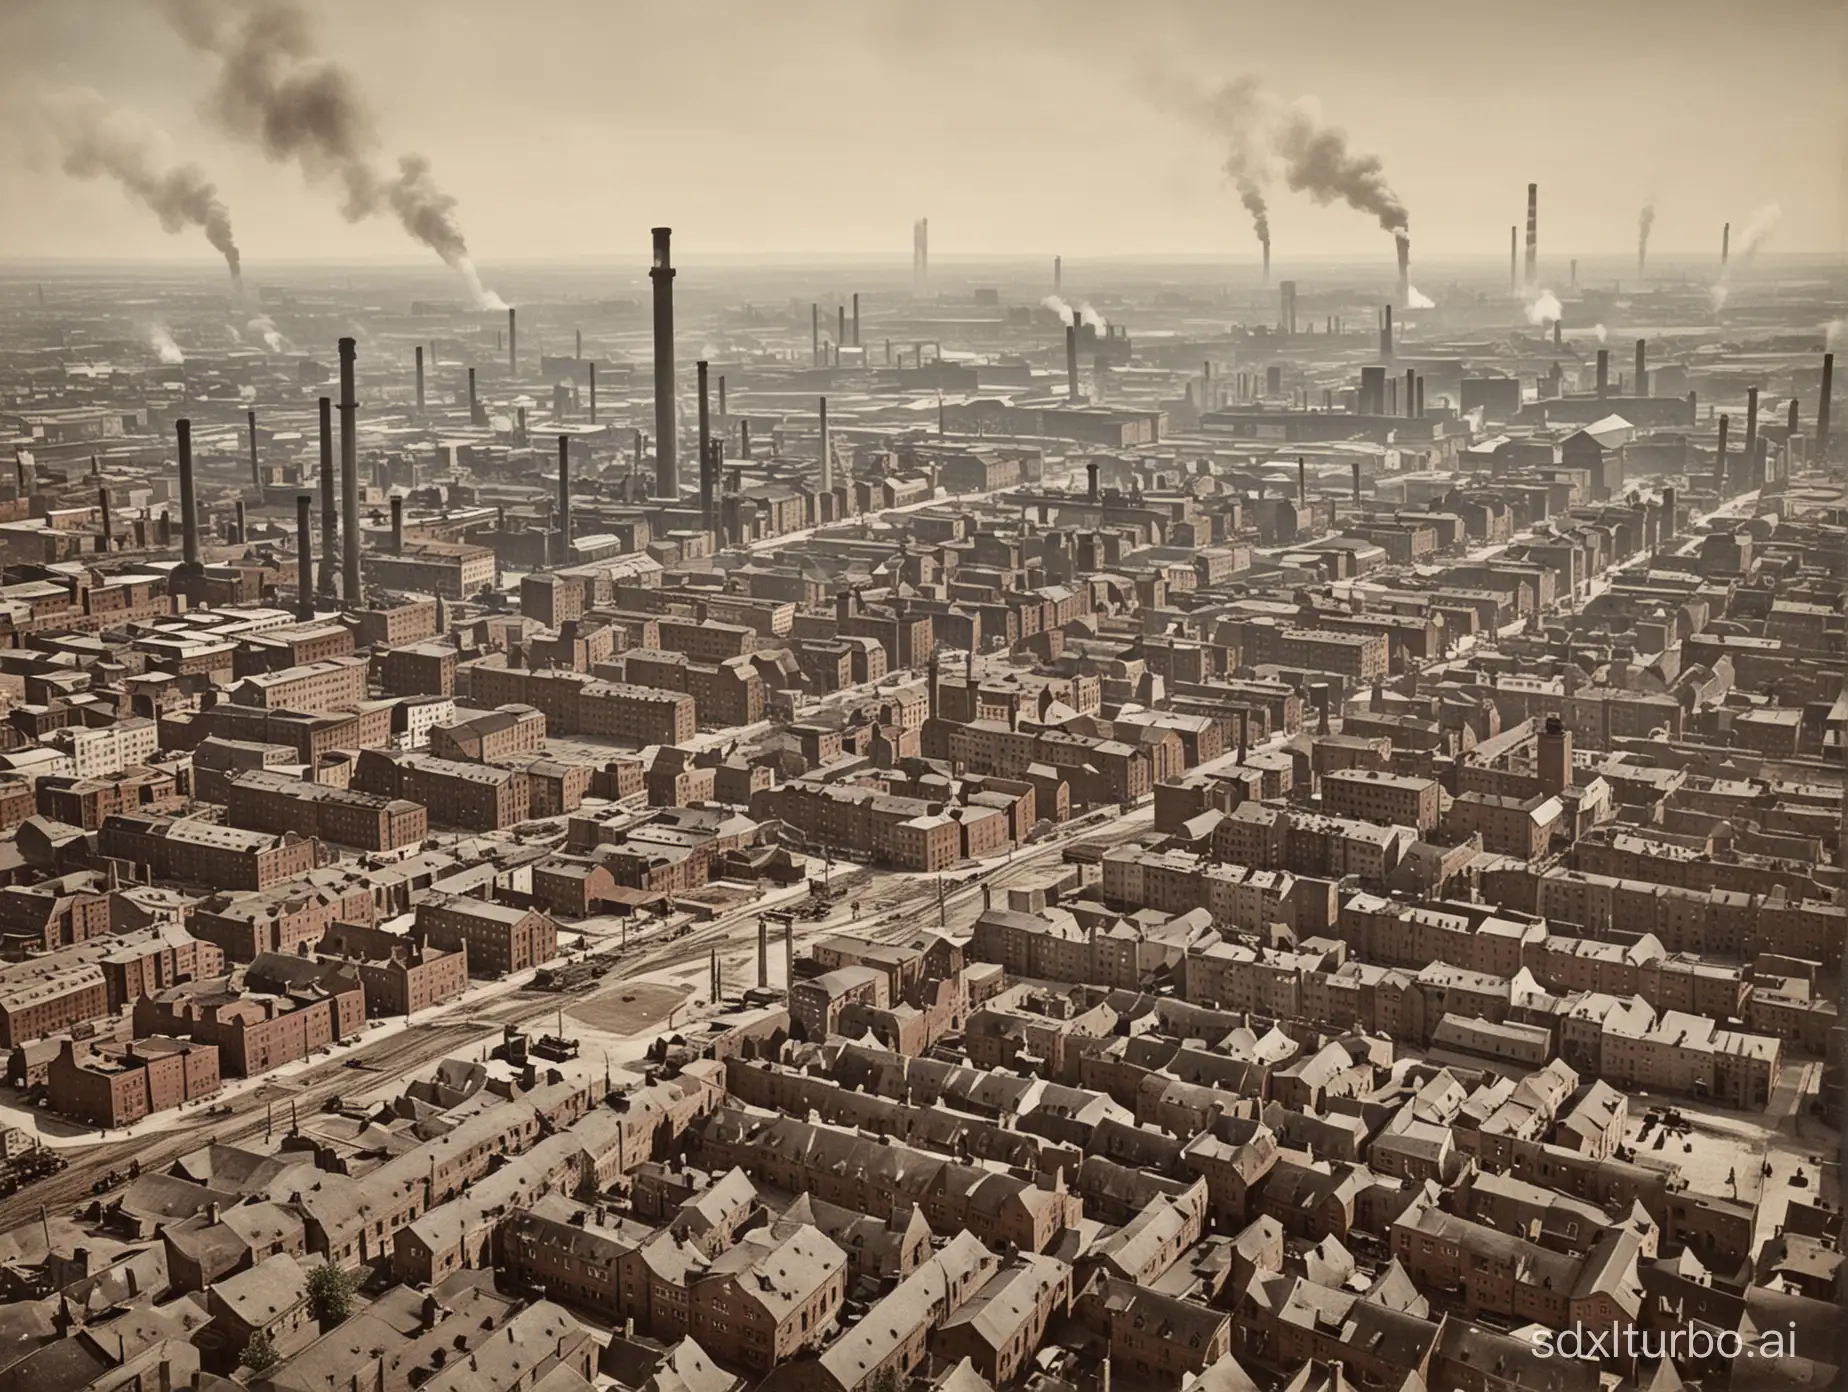 generate an image of a workers' quarter in an industrial city in Germany during the industrialization in the 19th century